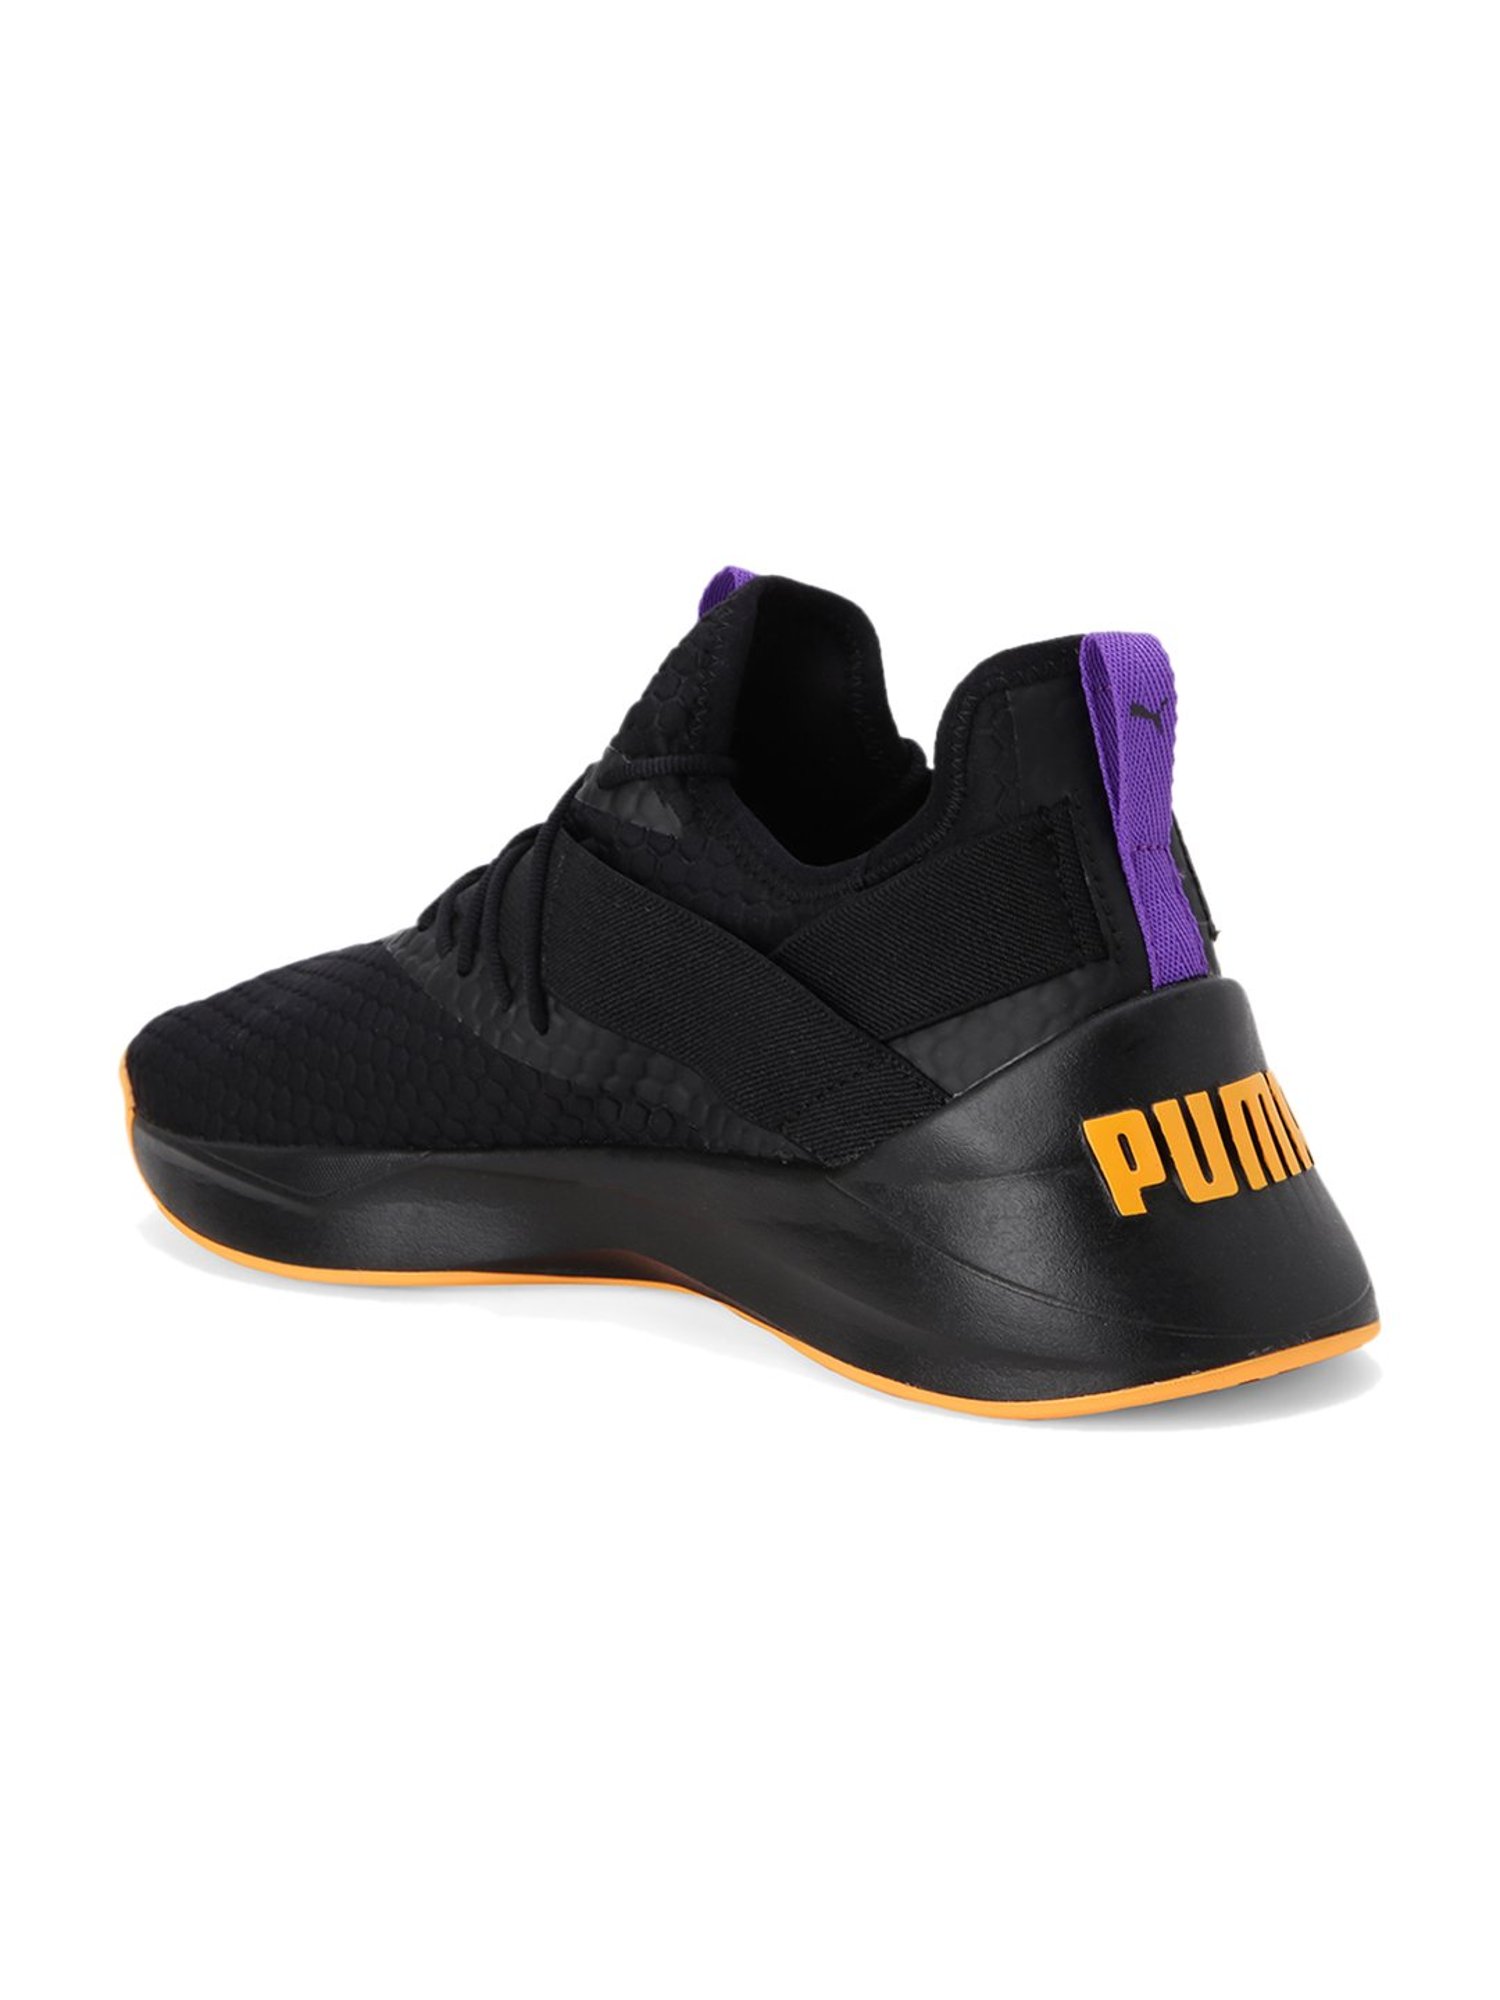 Buy Puma Jaab XT Black Training Shoes from Brands at Best Prices in India | Tata CLiQ